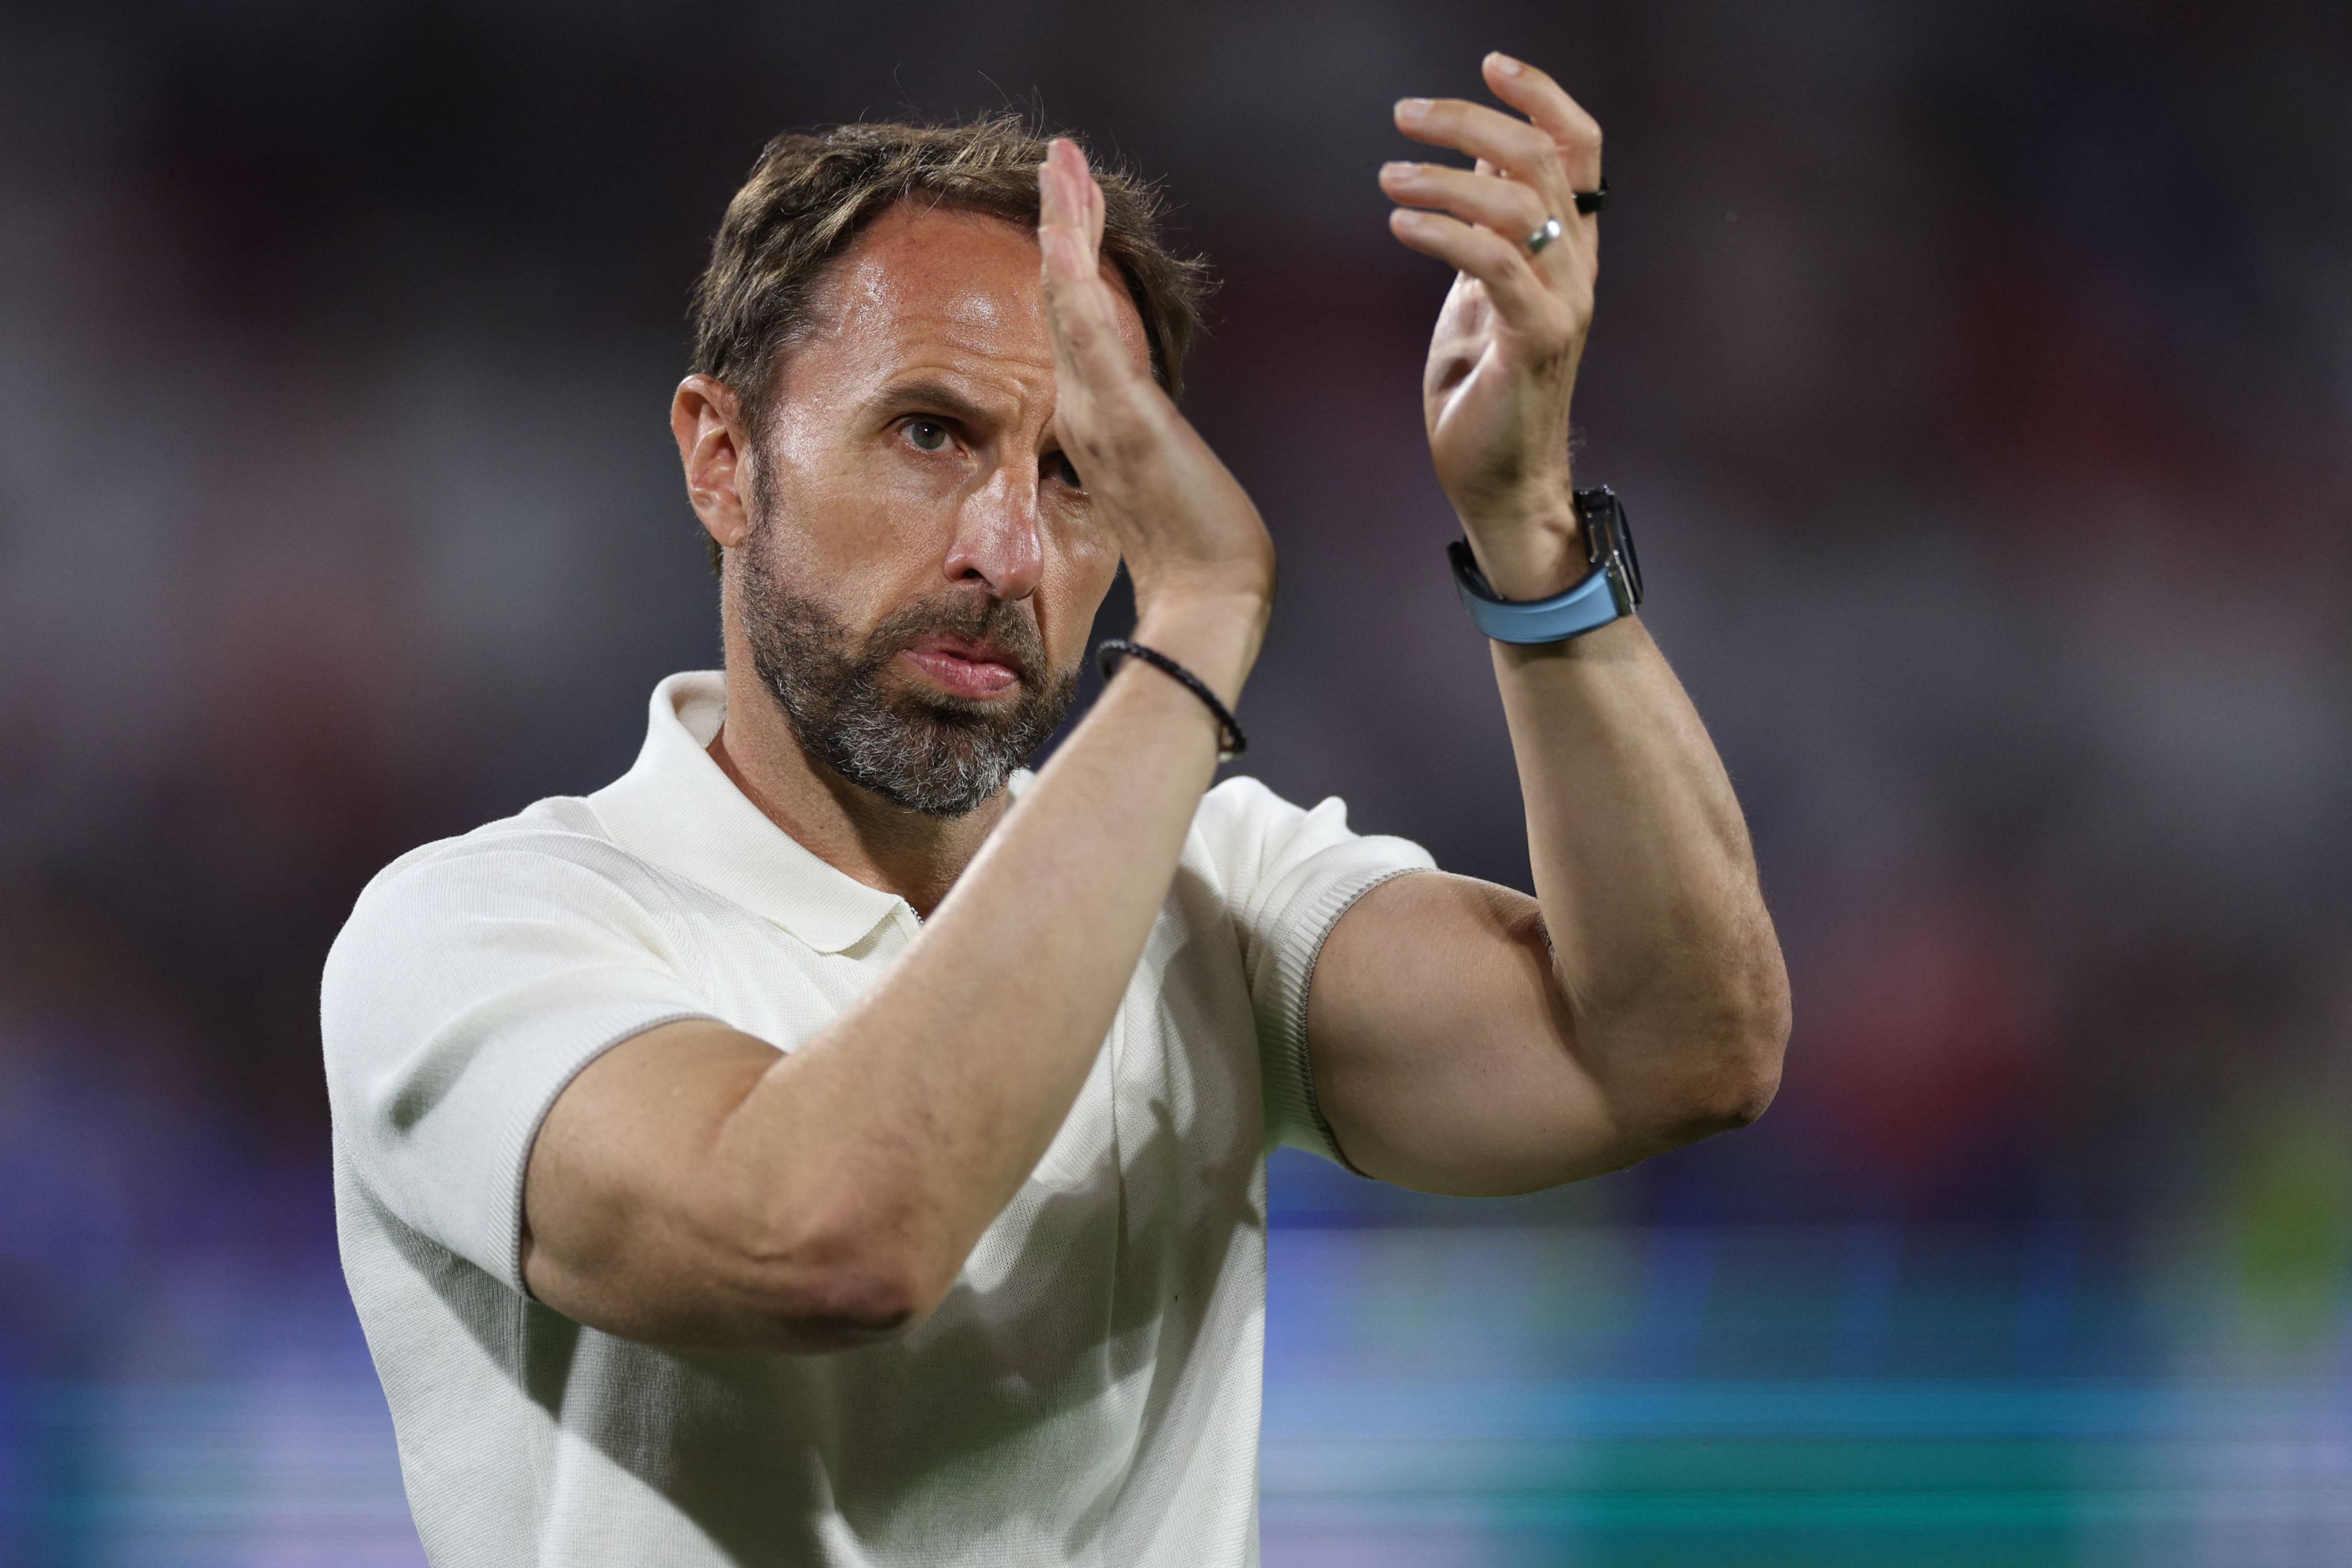 England’s head coach Gareth Southgate gestures to fans after his side’s draw with Slovenia. Photo: AFP